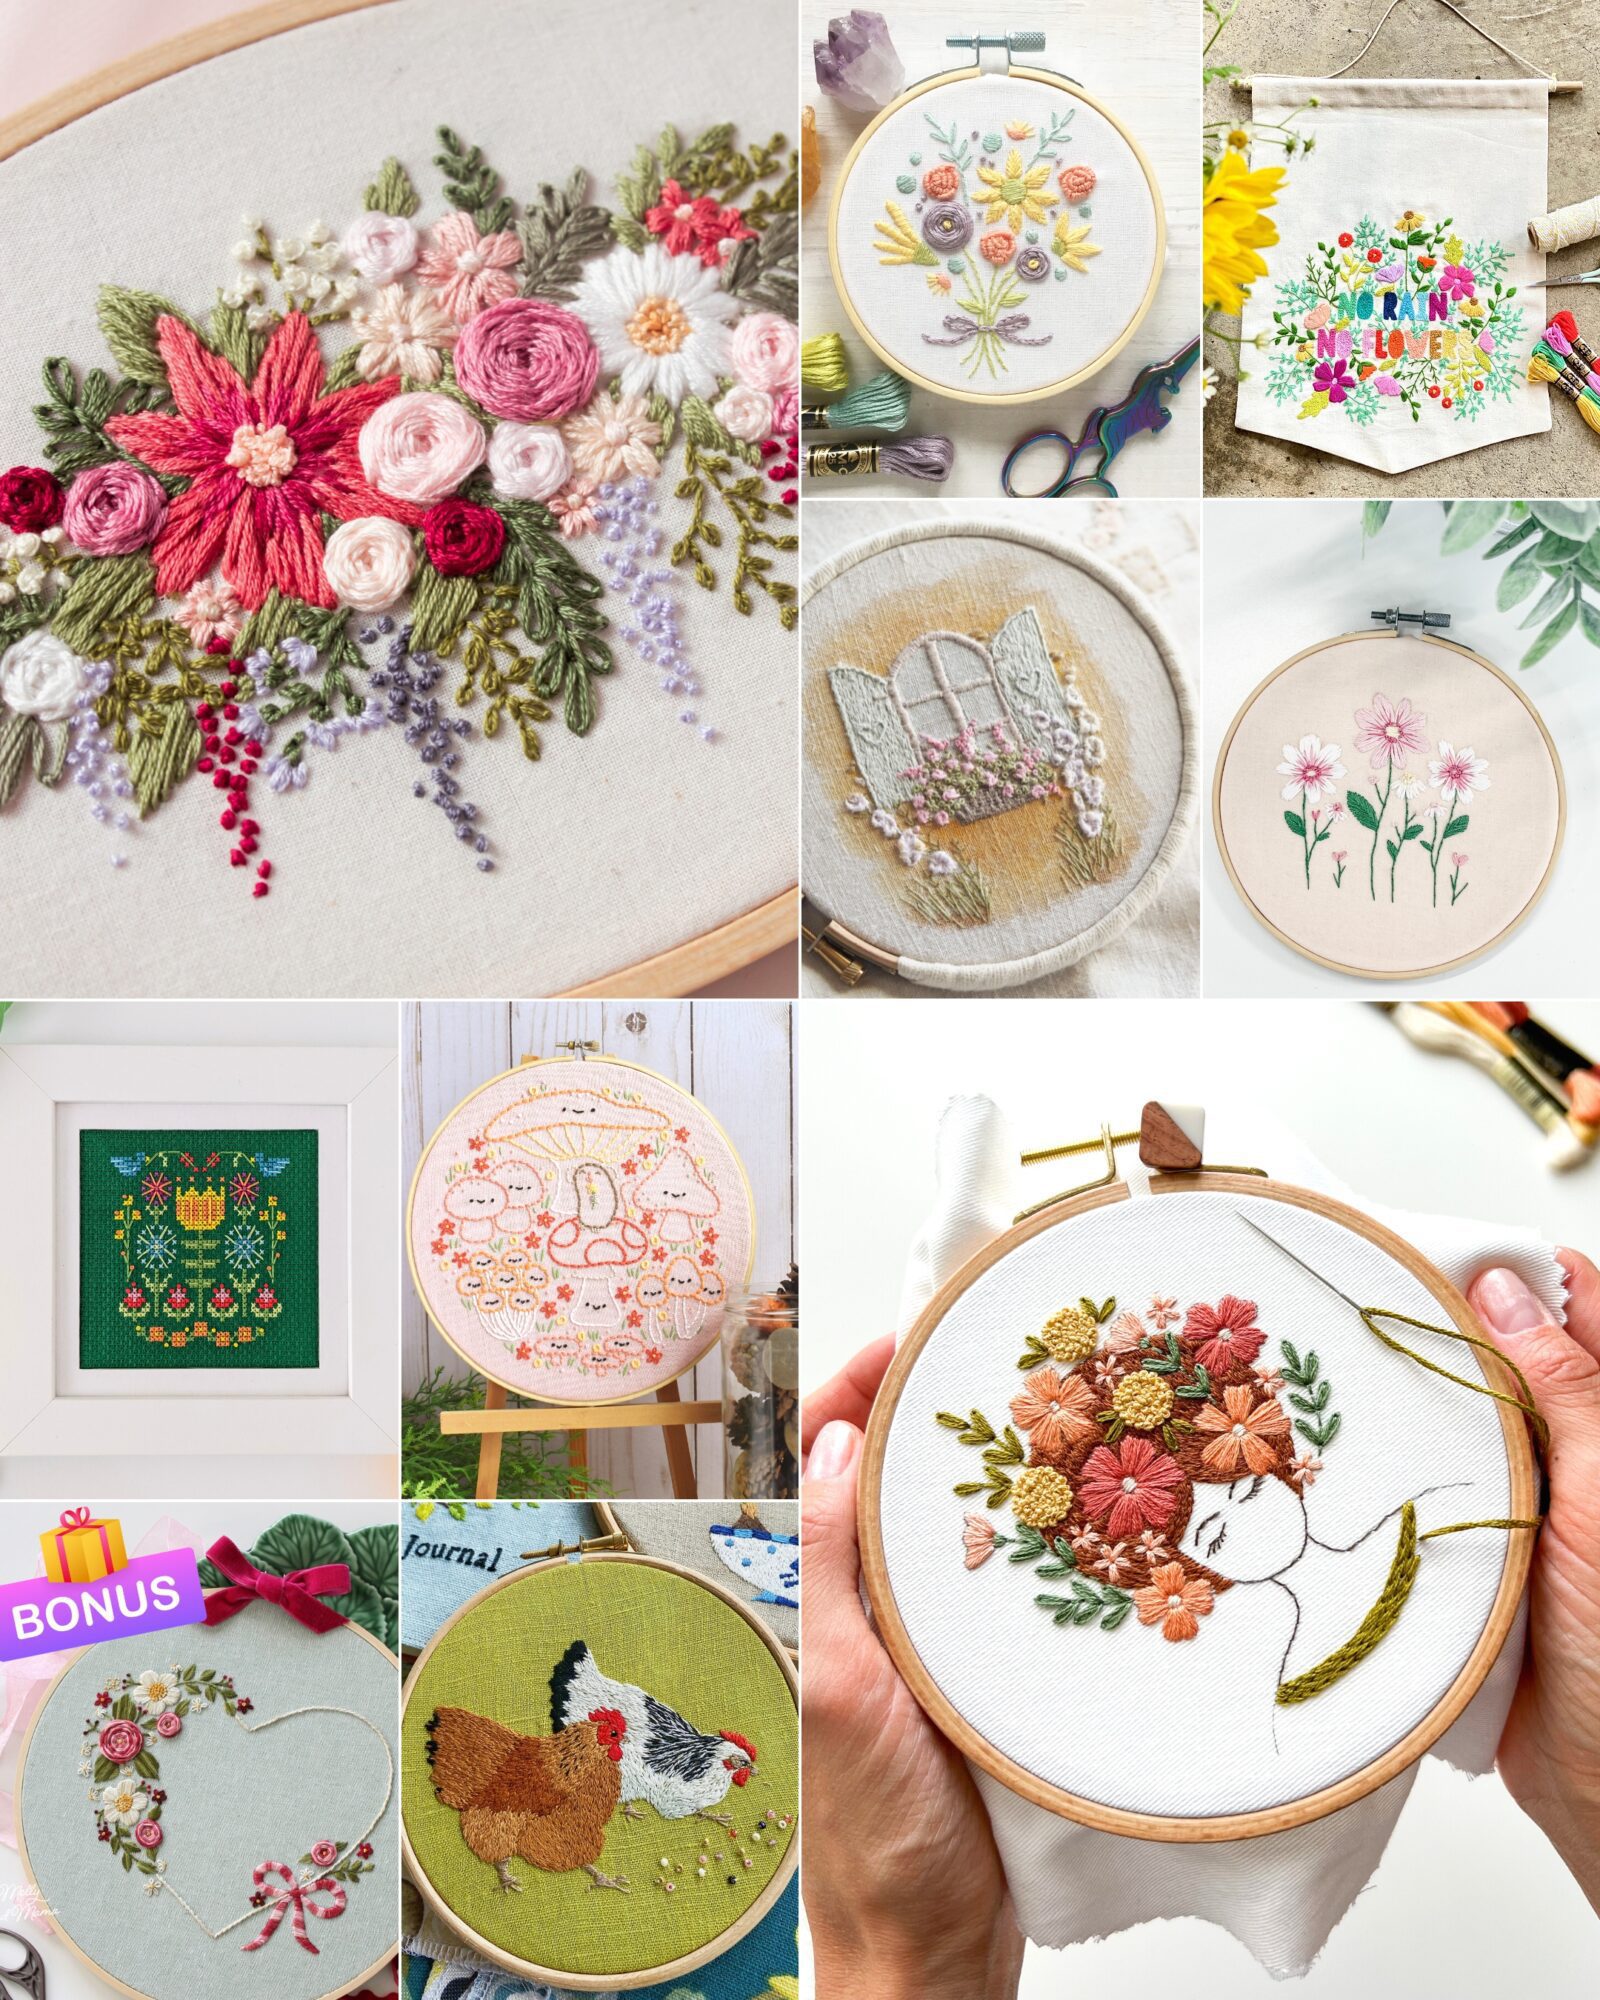 How To Decide What To Stitch On Your Embroidery Journal